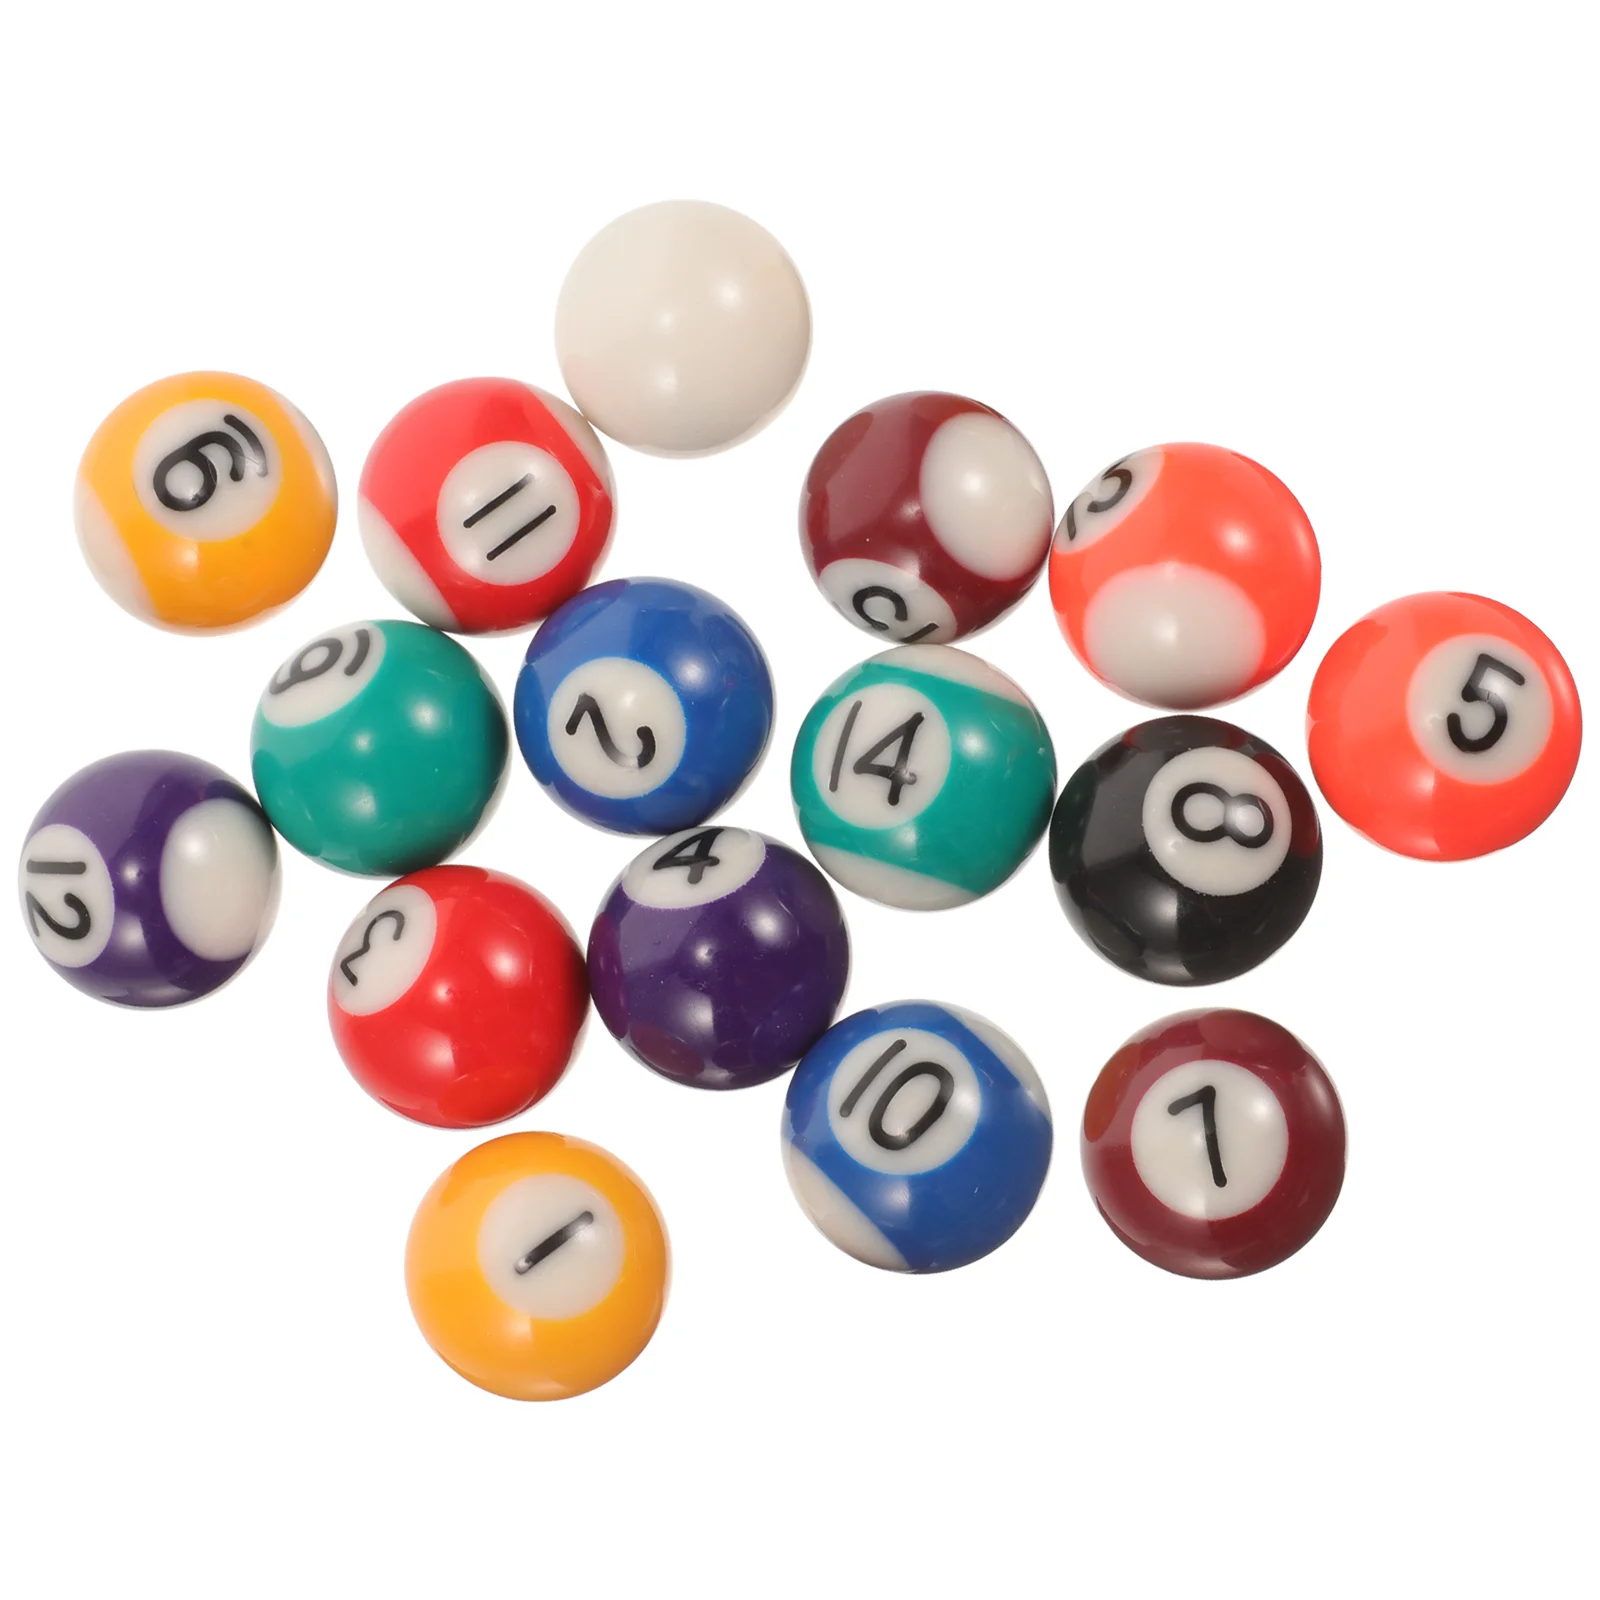 billiard cue ball wear resistant pool balls accessory replace replaceable white pool balls resin equipment wear resistant 1 Set of Miniature Billiard Ball Toys Replaceable Billiard Ball Toys Resin Pool Balls Billiard Necessity